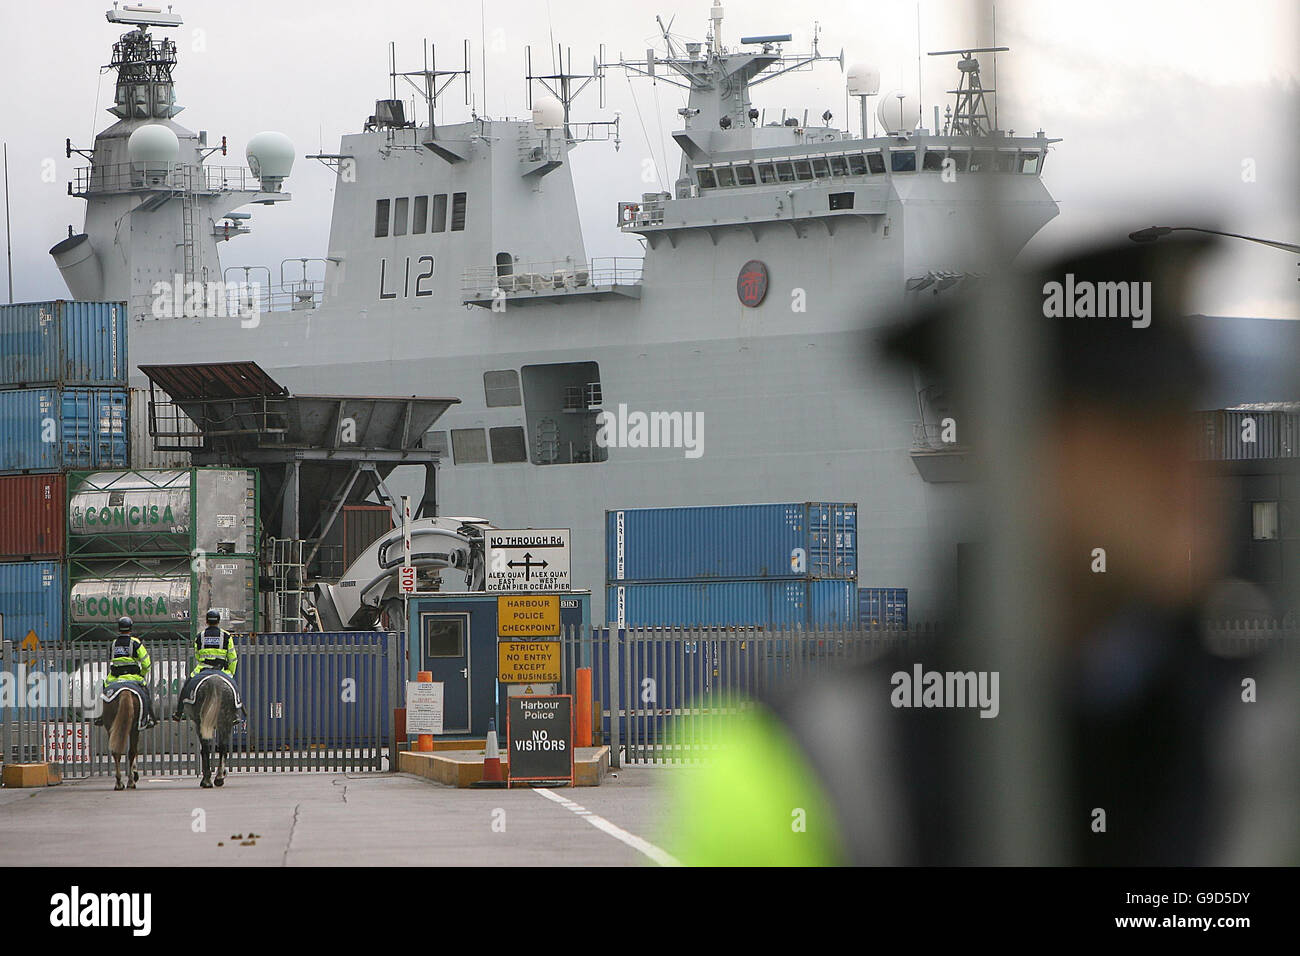 HMS Ocean under heavy Garda protection as anti-war activists marhced against the visit of British war ship to Dublin port. Stock Photo